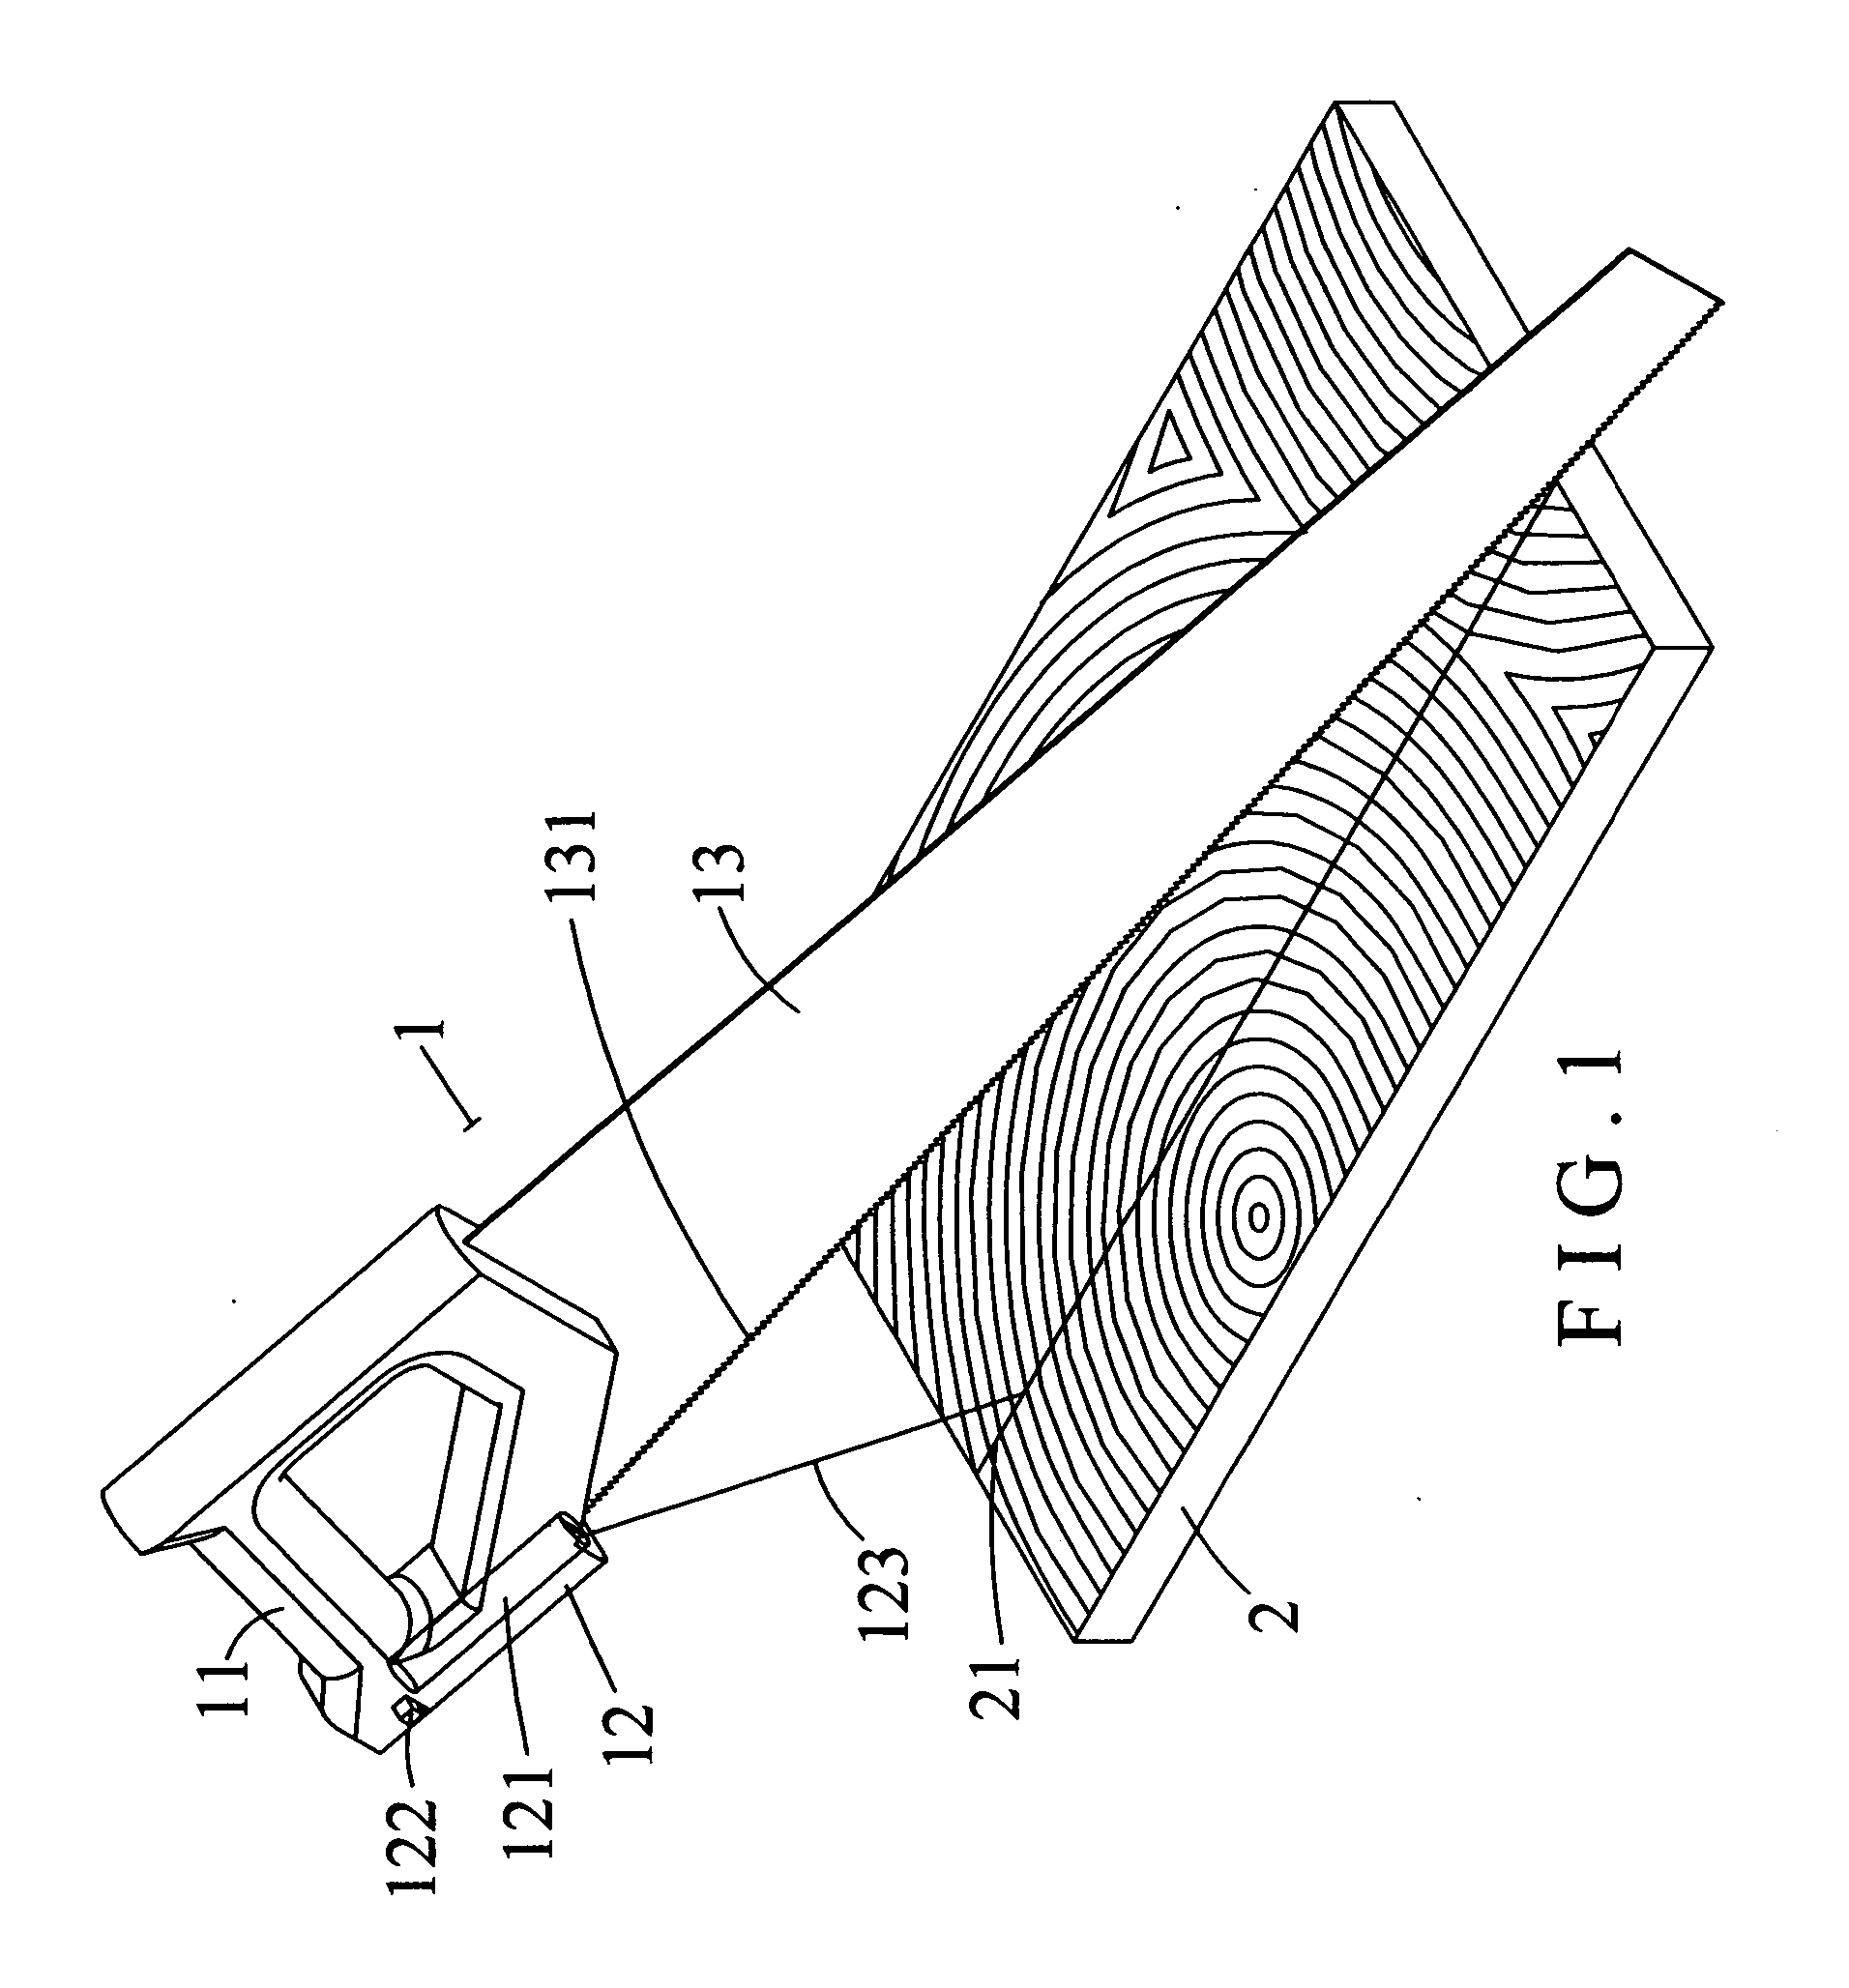 Handsaw having sawing guide function